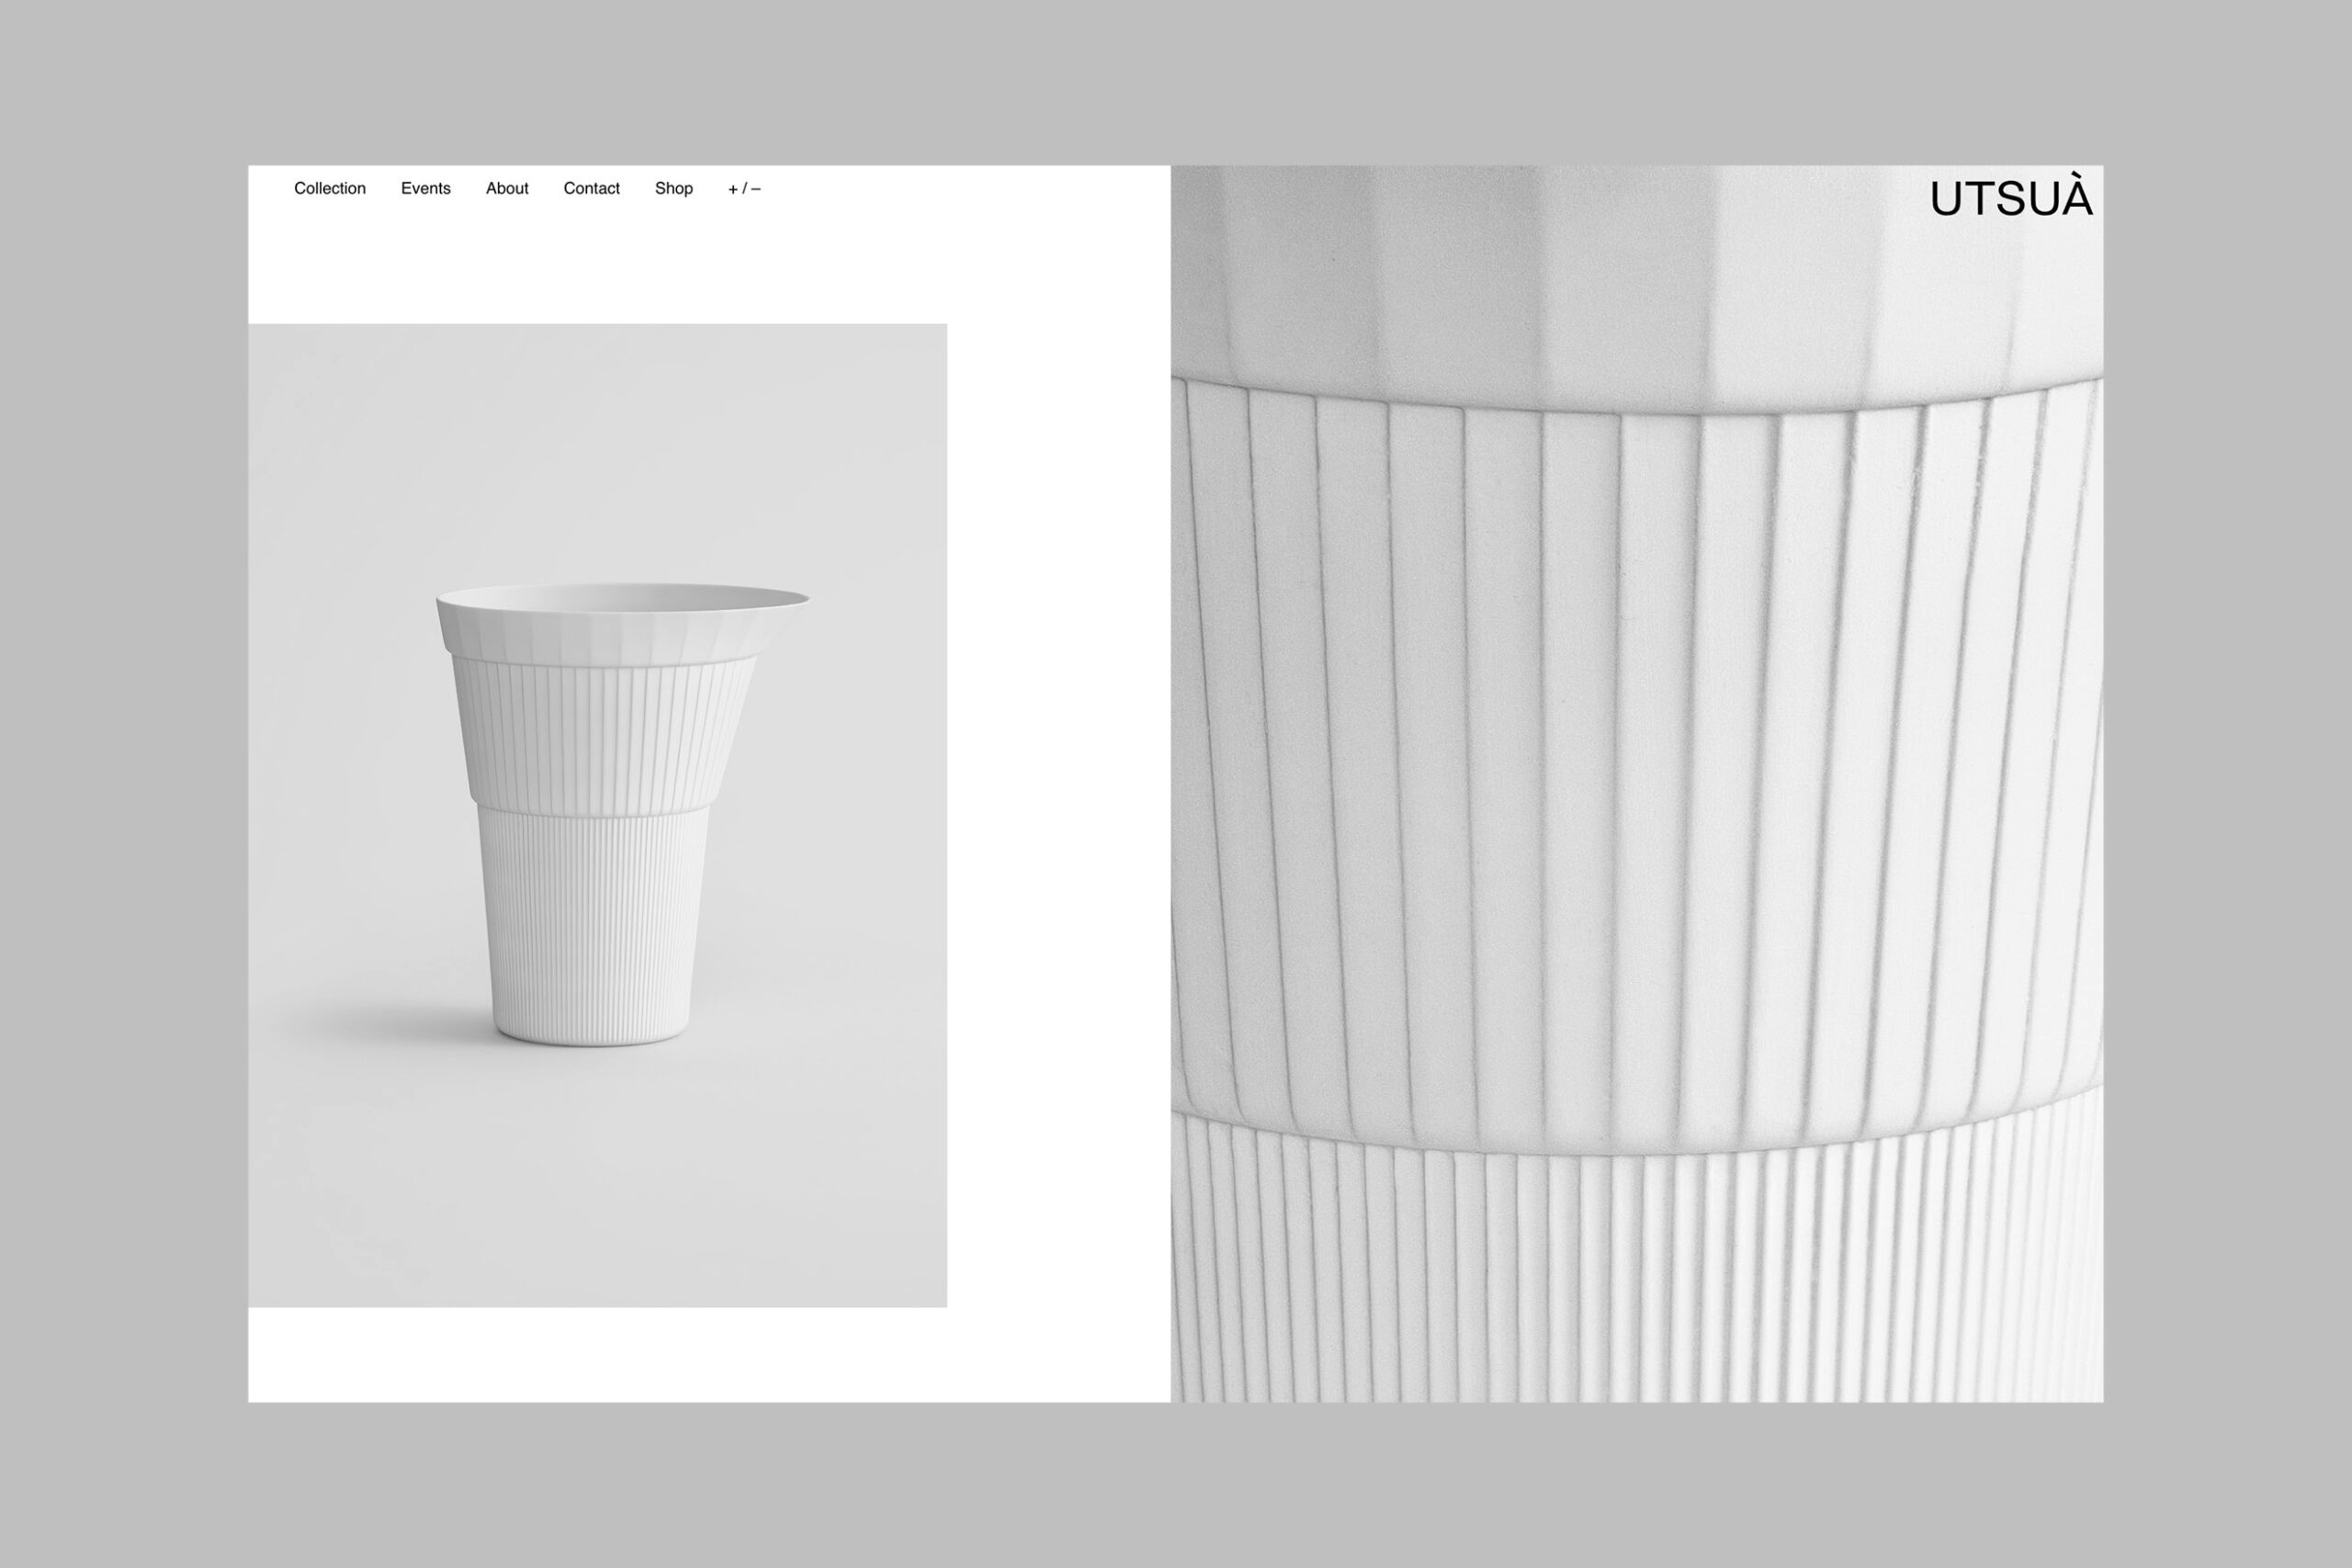 Utsua web layout showing a carafe and its close up photograph